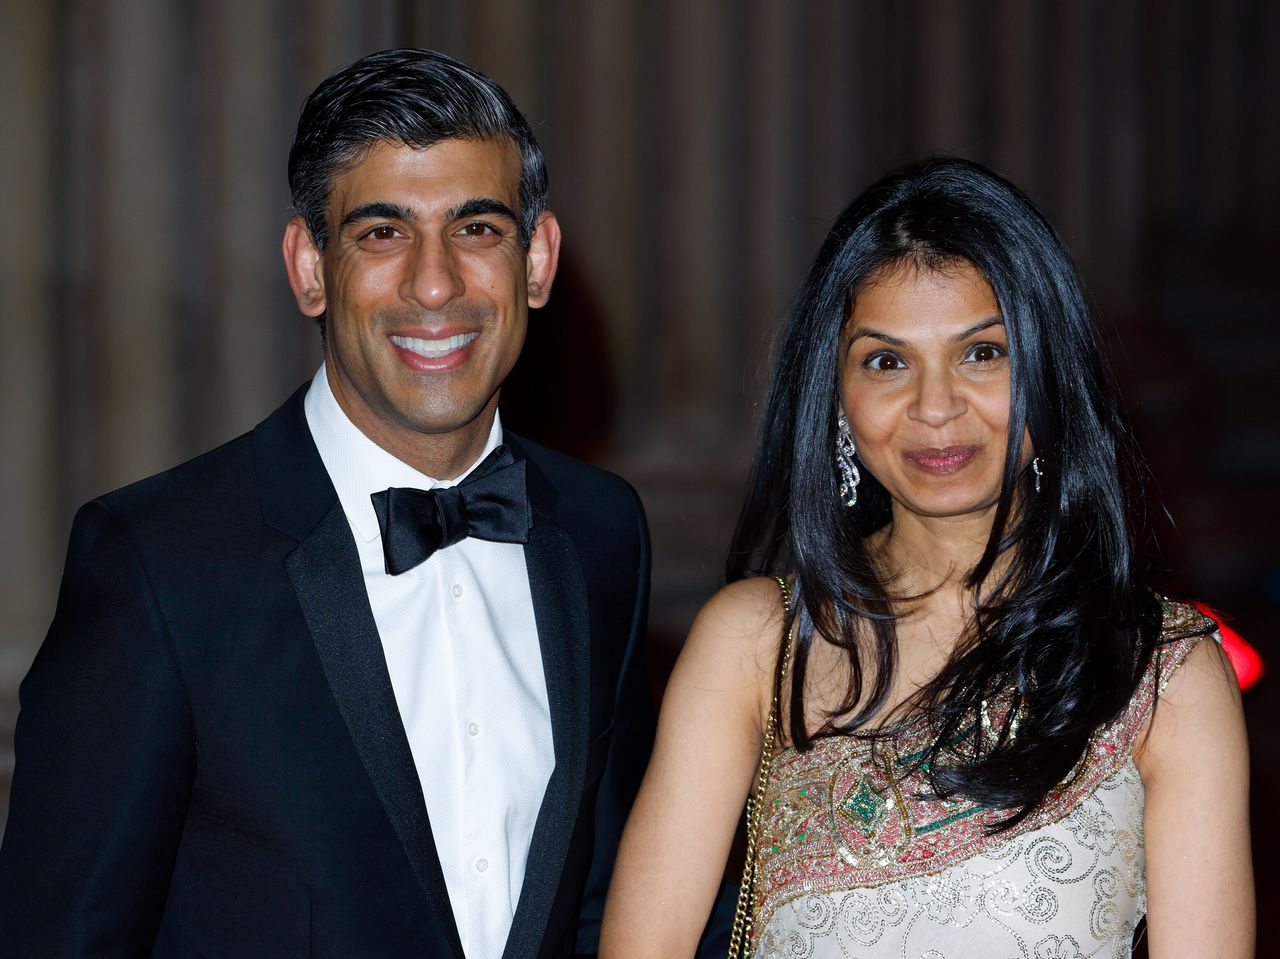 Chancellor of the Exchequer Rishi Sunak and his wife Akshata Murthy.